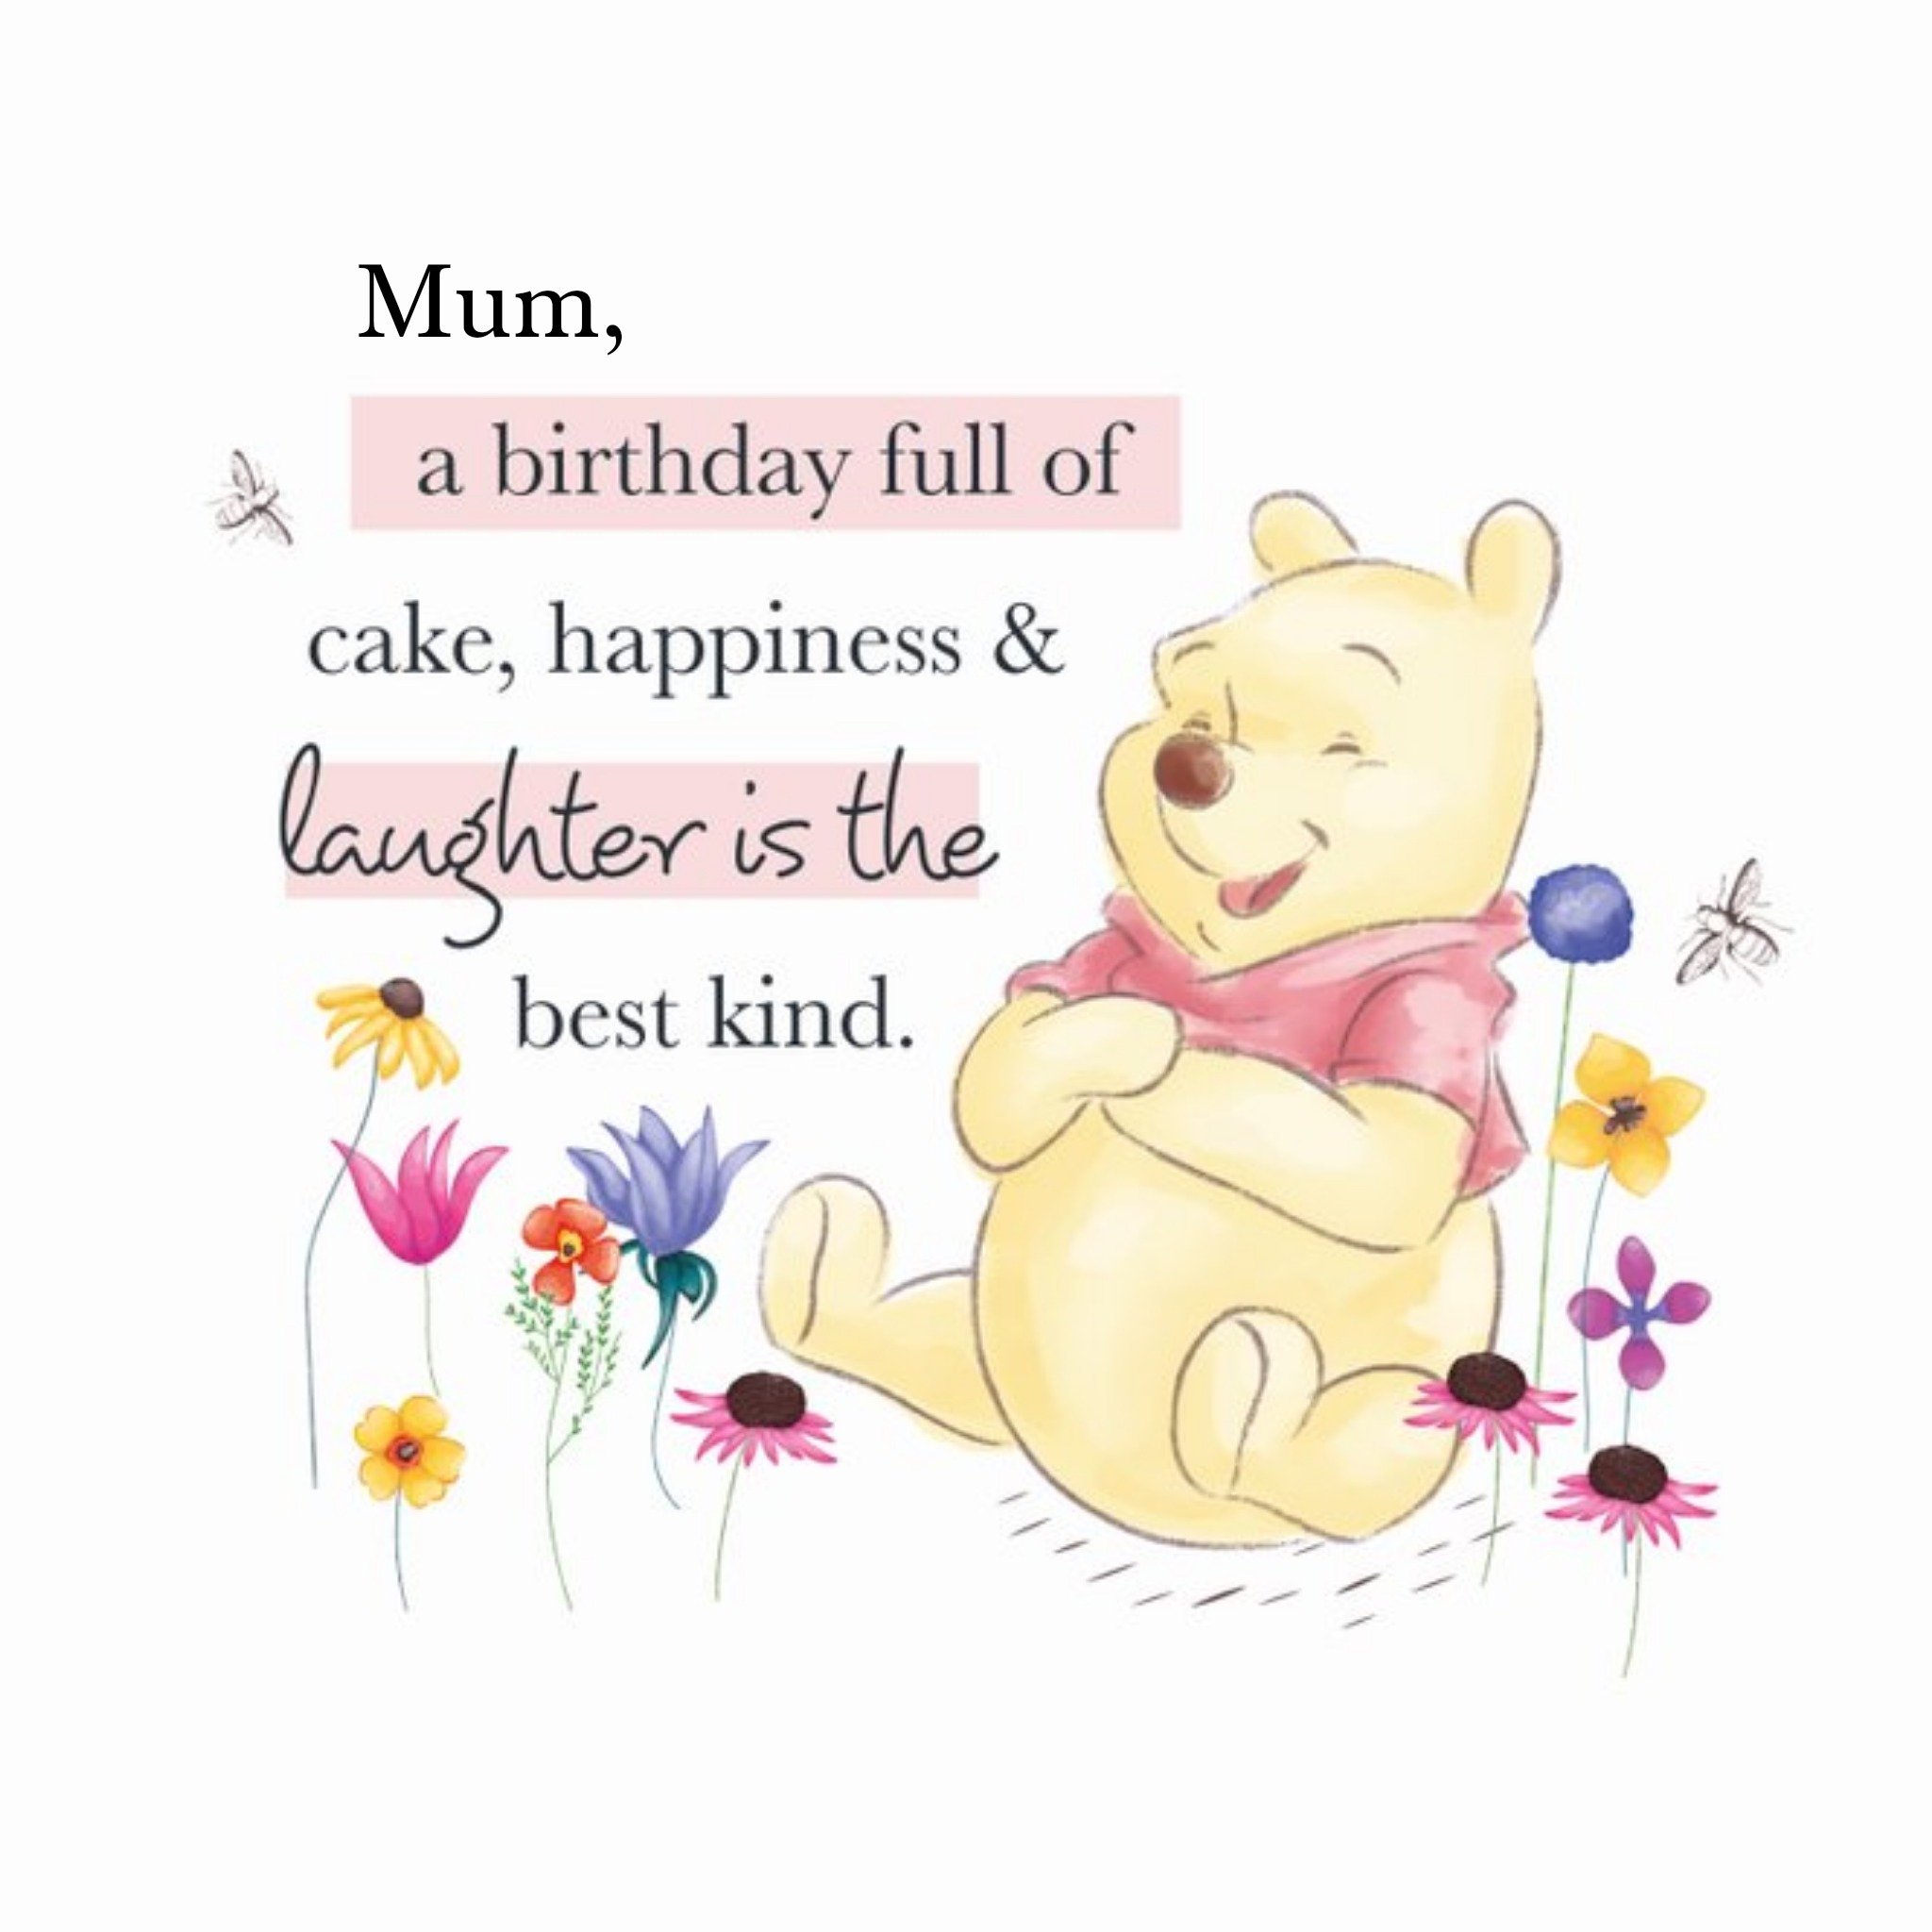 Winnie The Pooh Cake Happiness And Laughter Birthday Card For Mum, Large